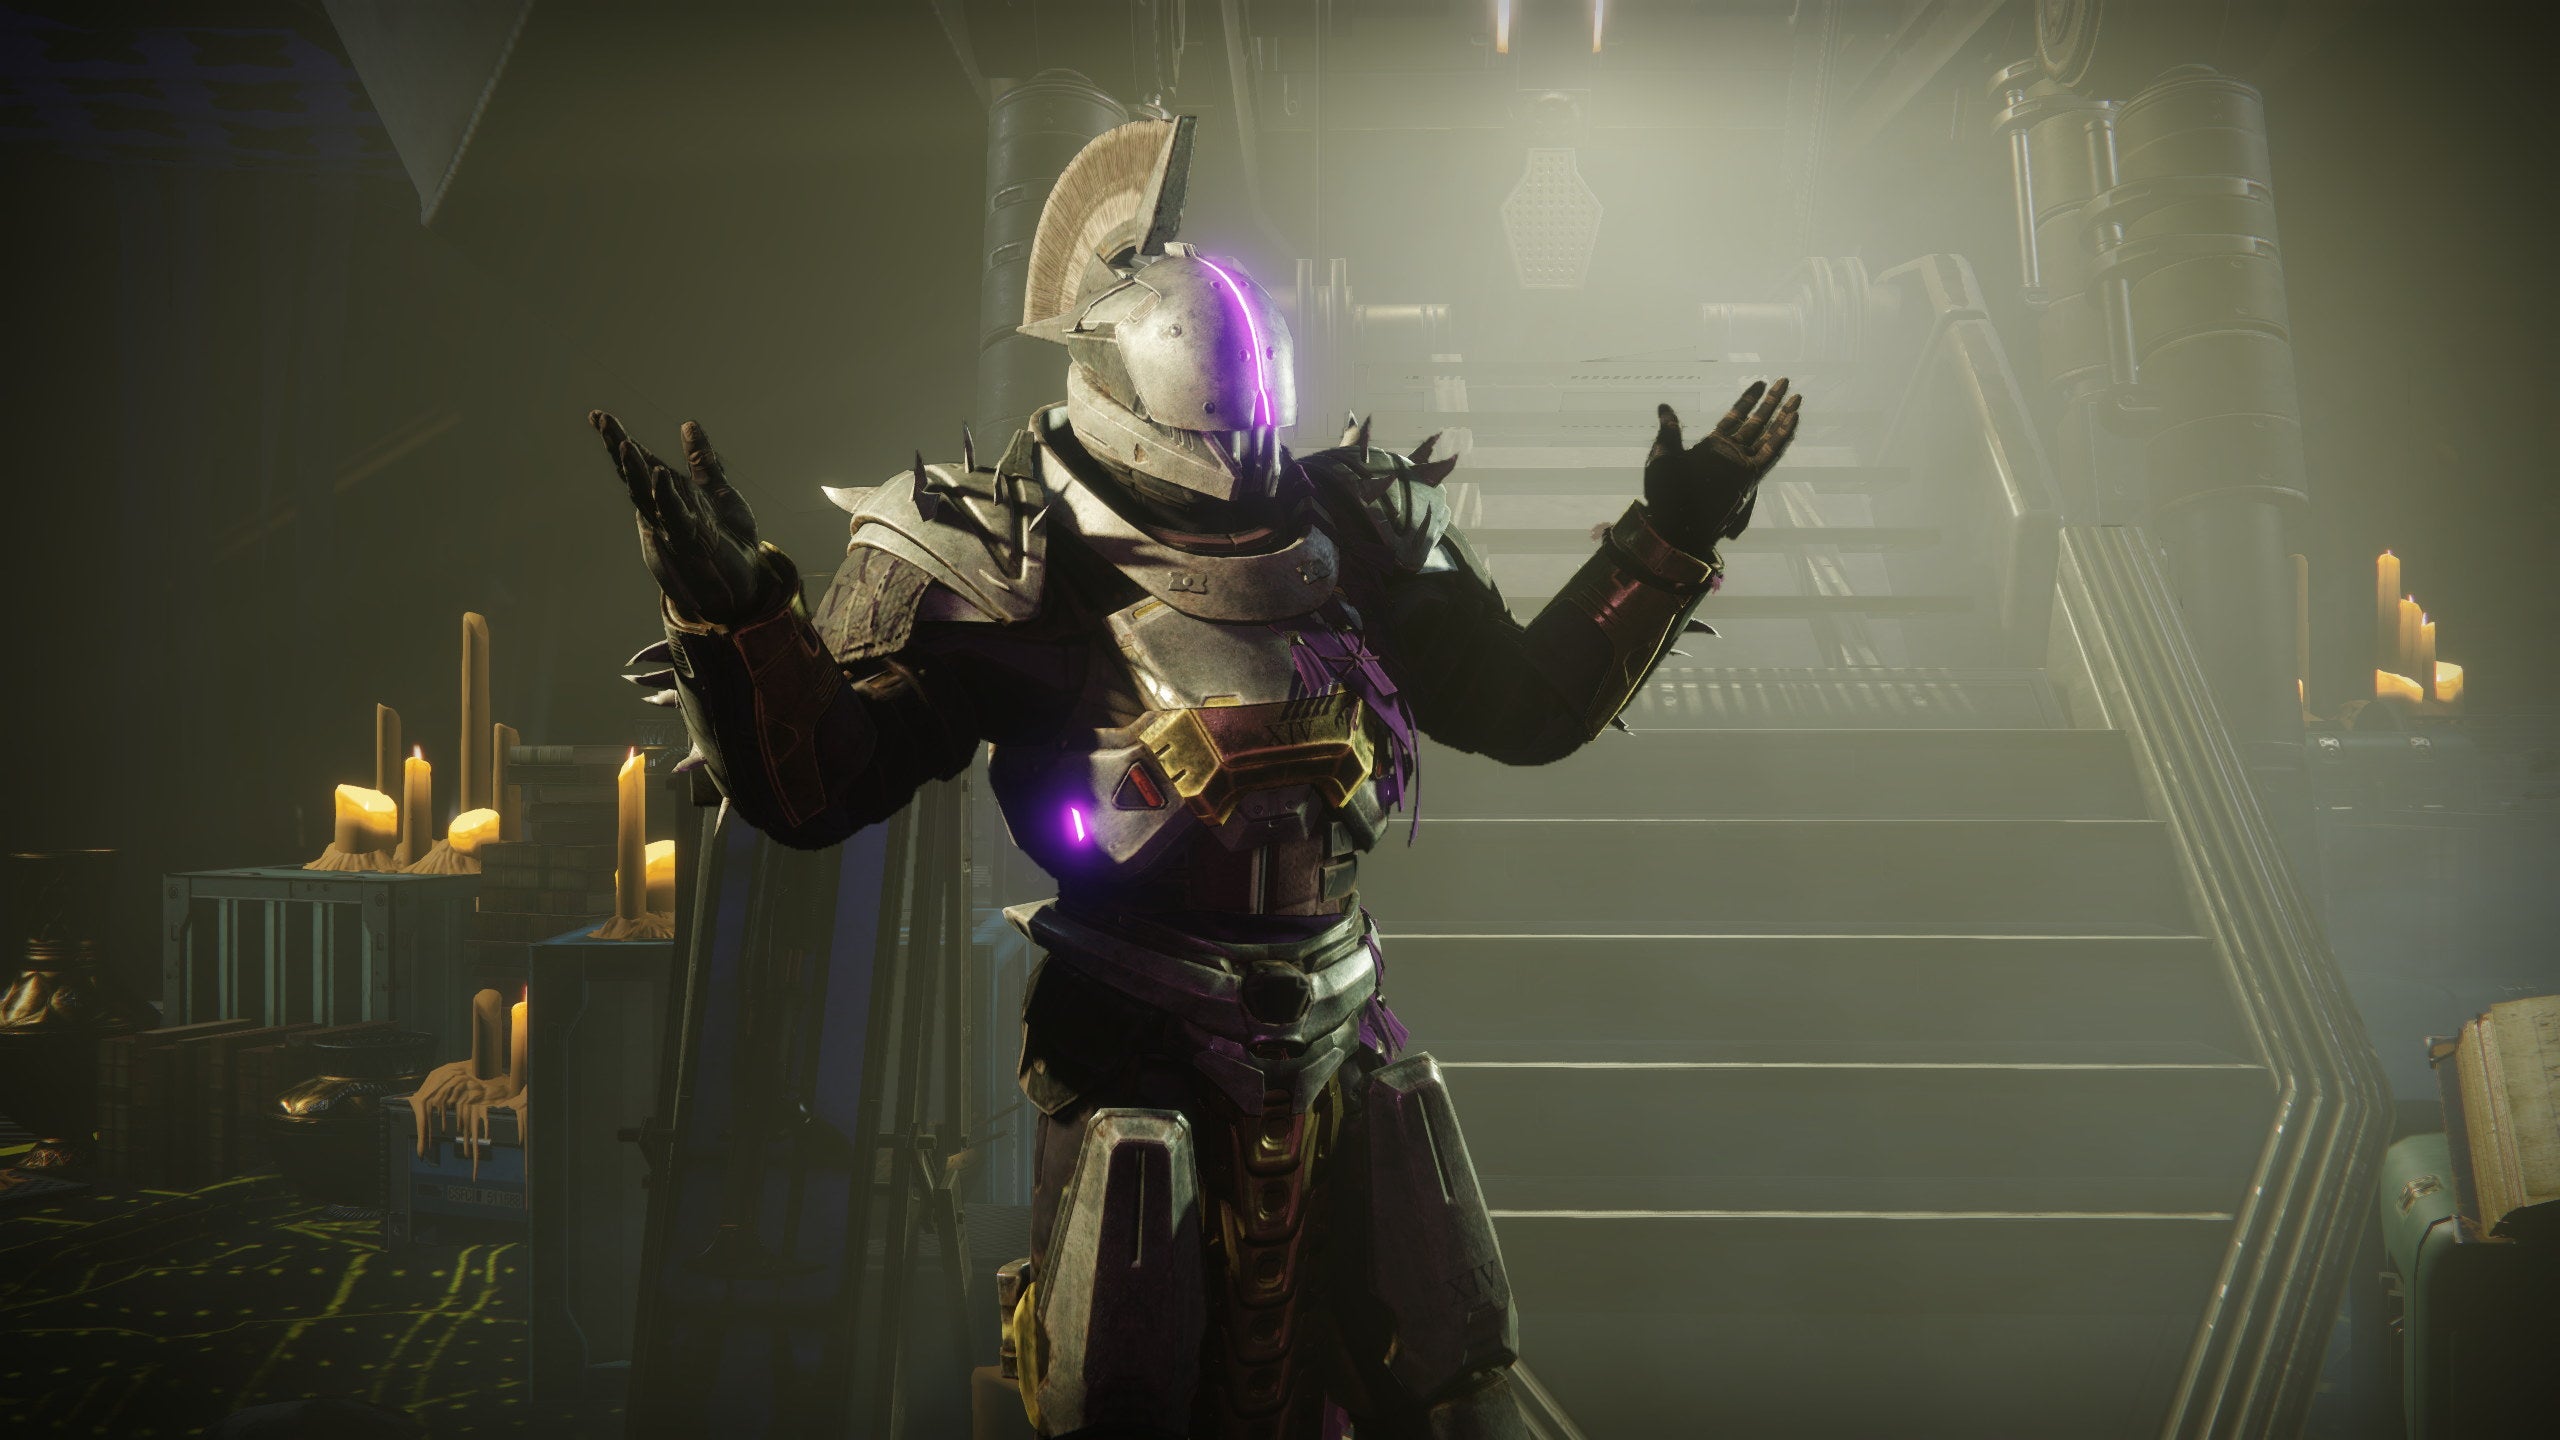 Destiny 2 is ending, but delaying the next expansion